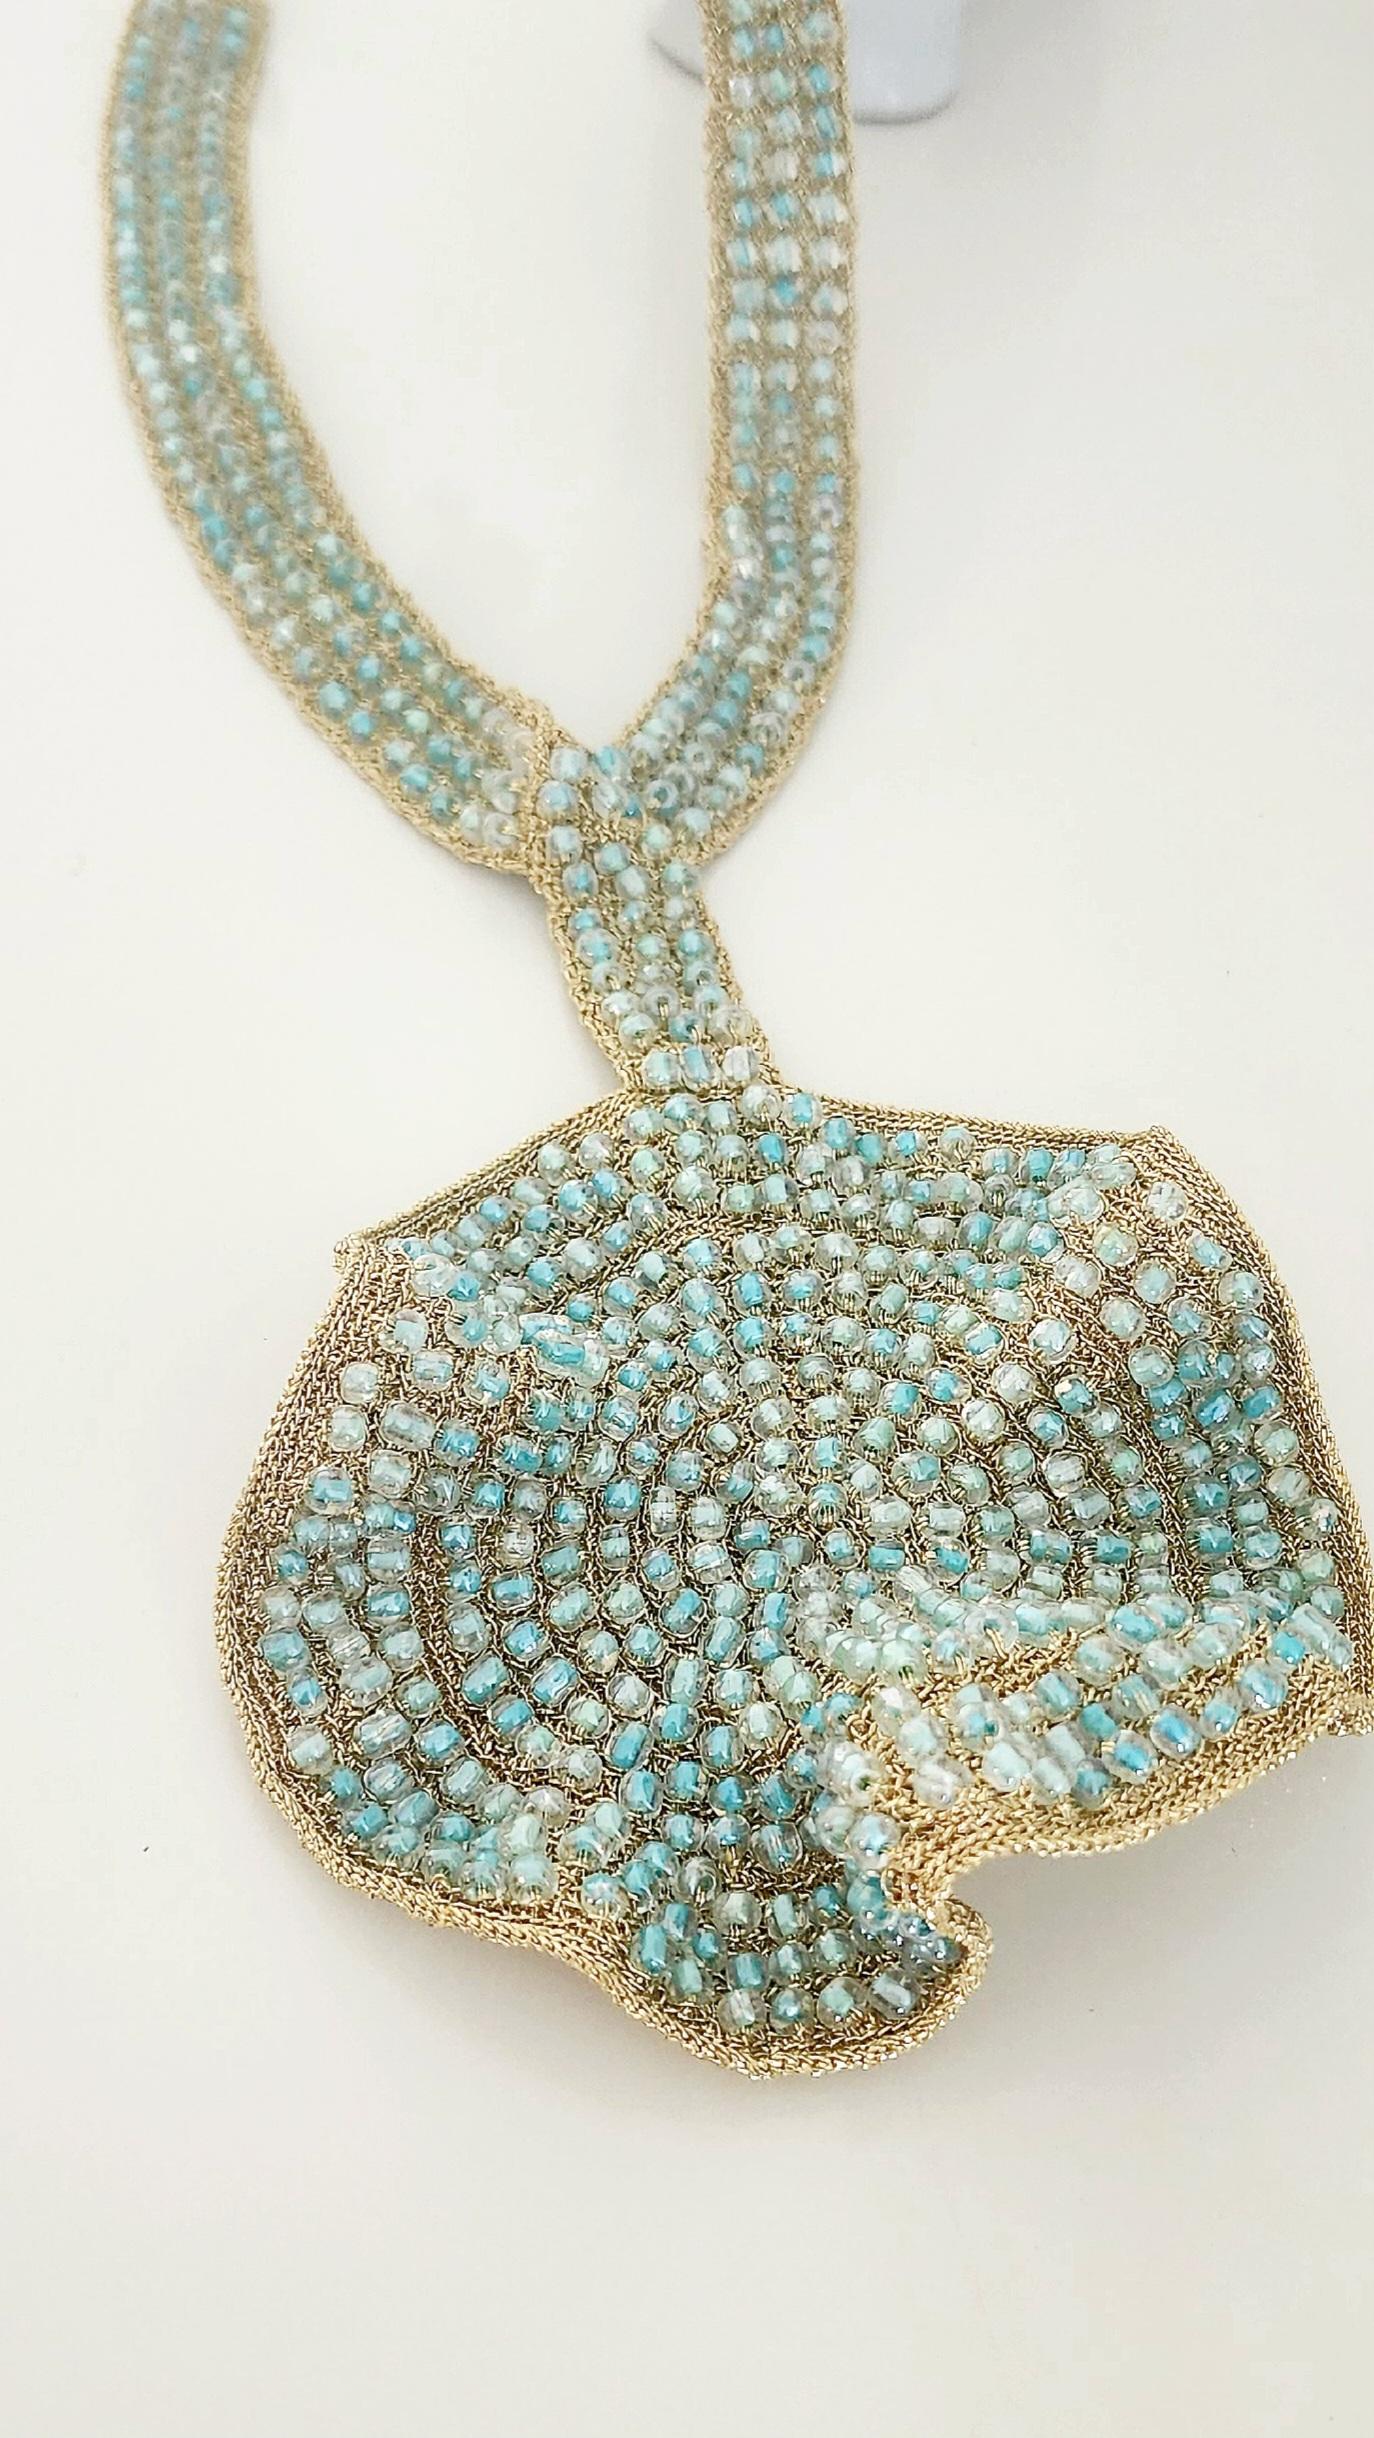 Statement Light Blue Glass Beads Crochet Necklace Light Golden Thread In New Condition For Sale In Kfar Sava, IL